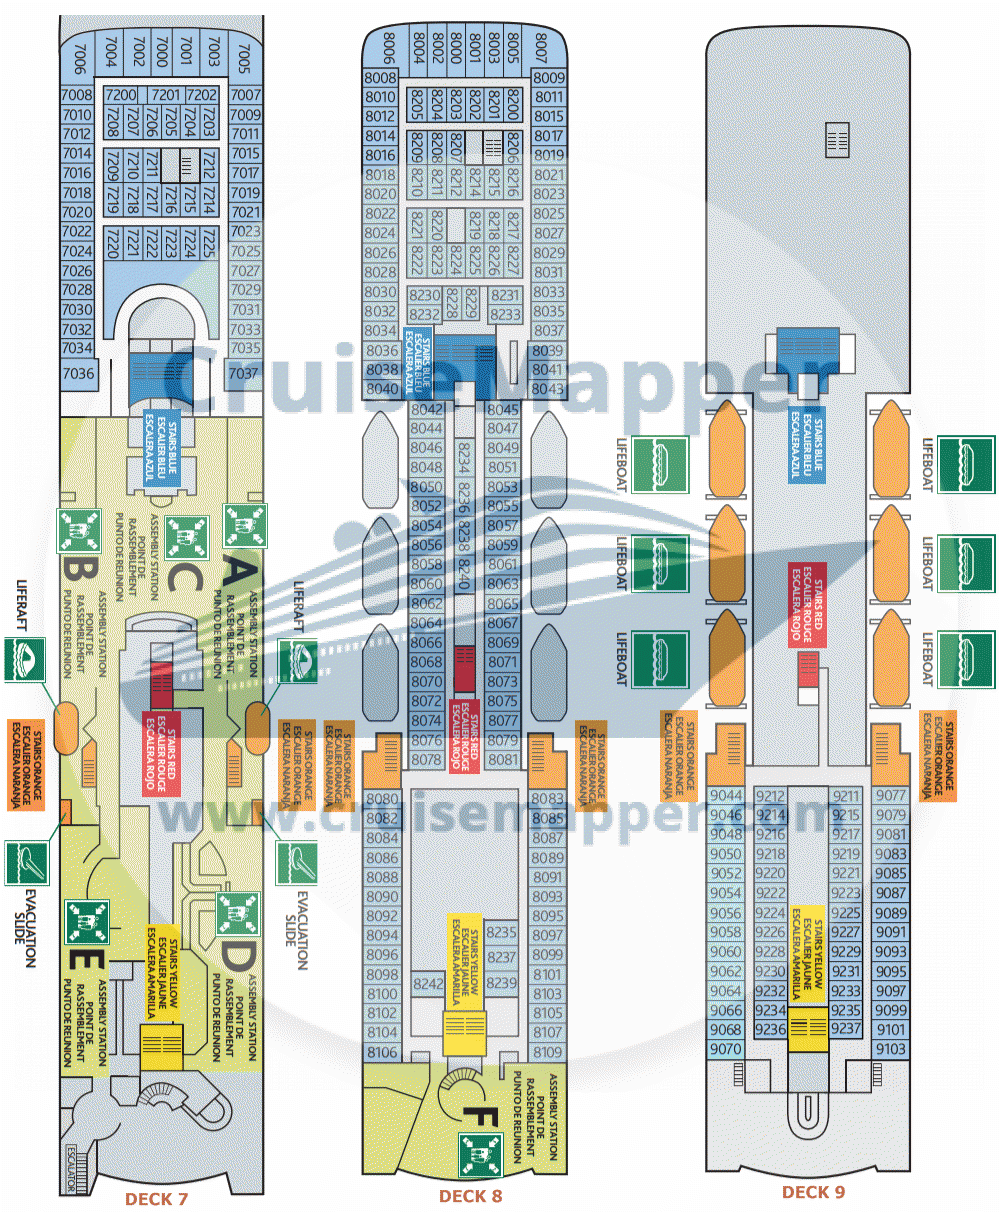 Cap Finistere ferry deck plans 7-8-9 (muster stations)